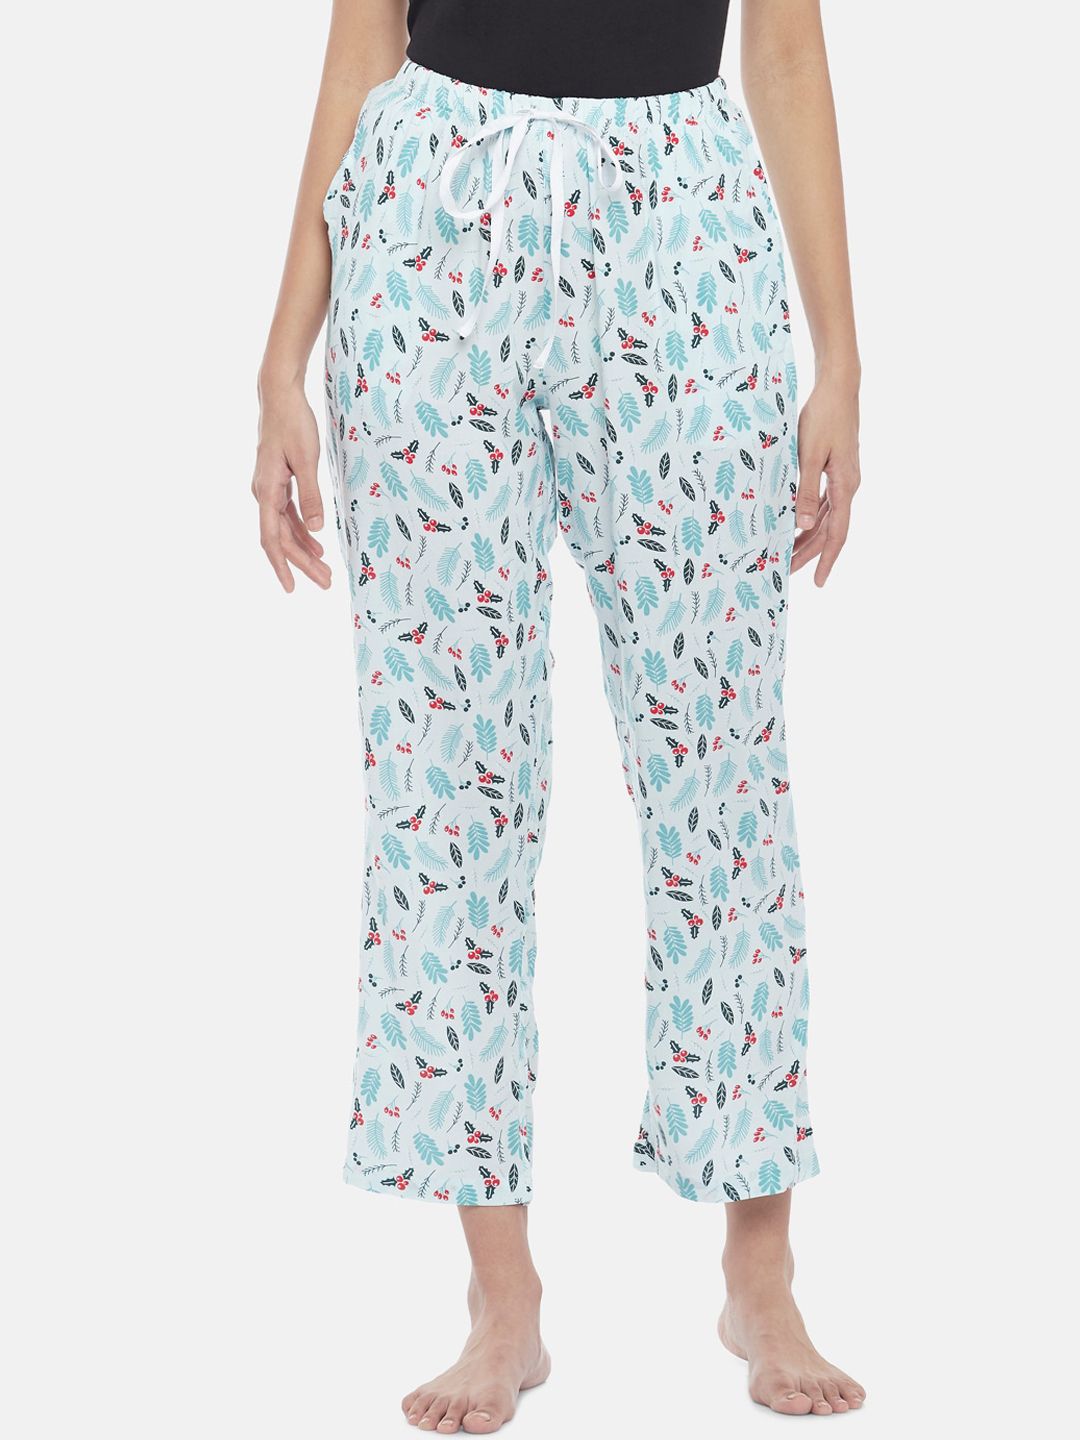 Dreamz by Pantaloons Women Blue Printed Cotton Lounge Pants Price in India